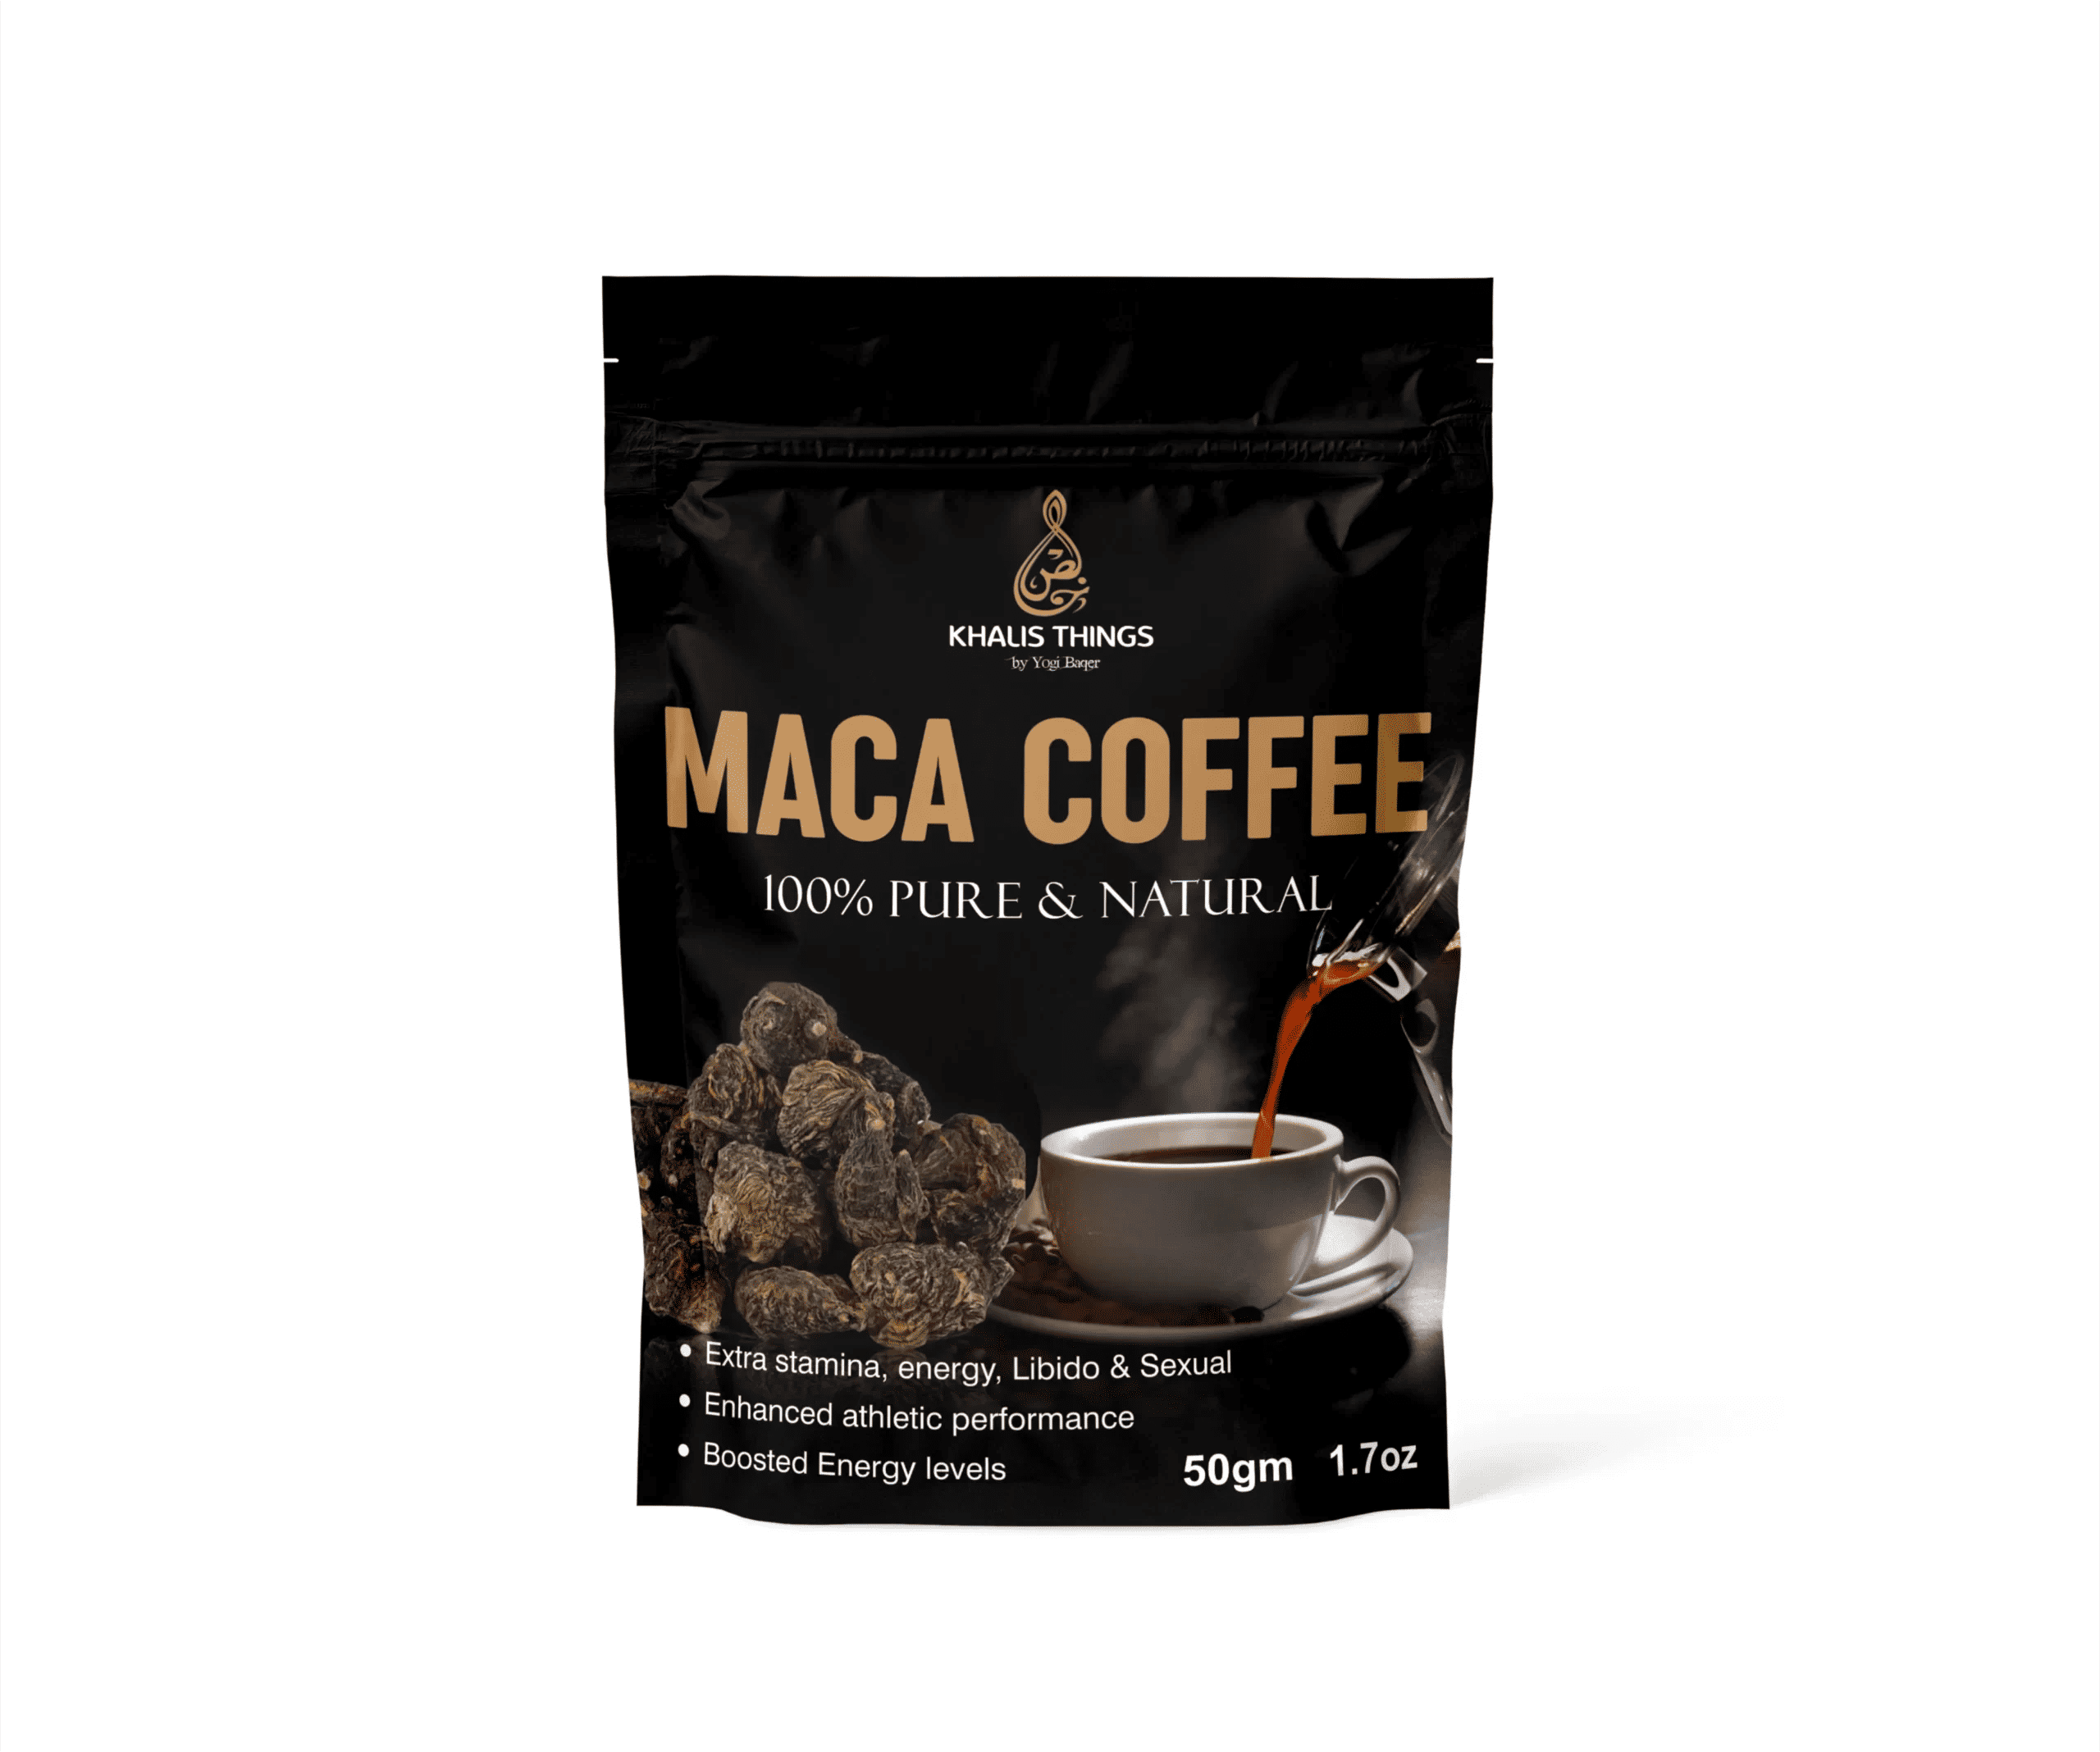 A cup of Maca Coffee with maca root powder, cacao powder and coffee beans, showing the different types of Maca Powder